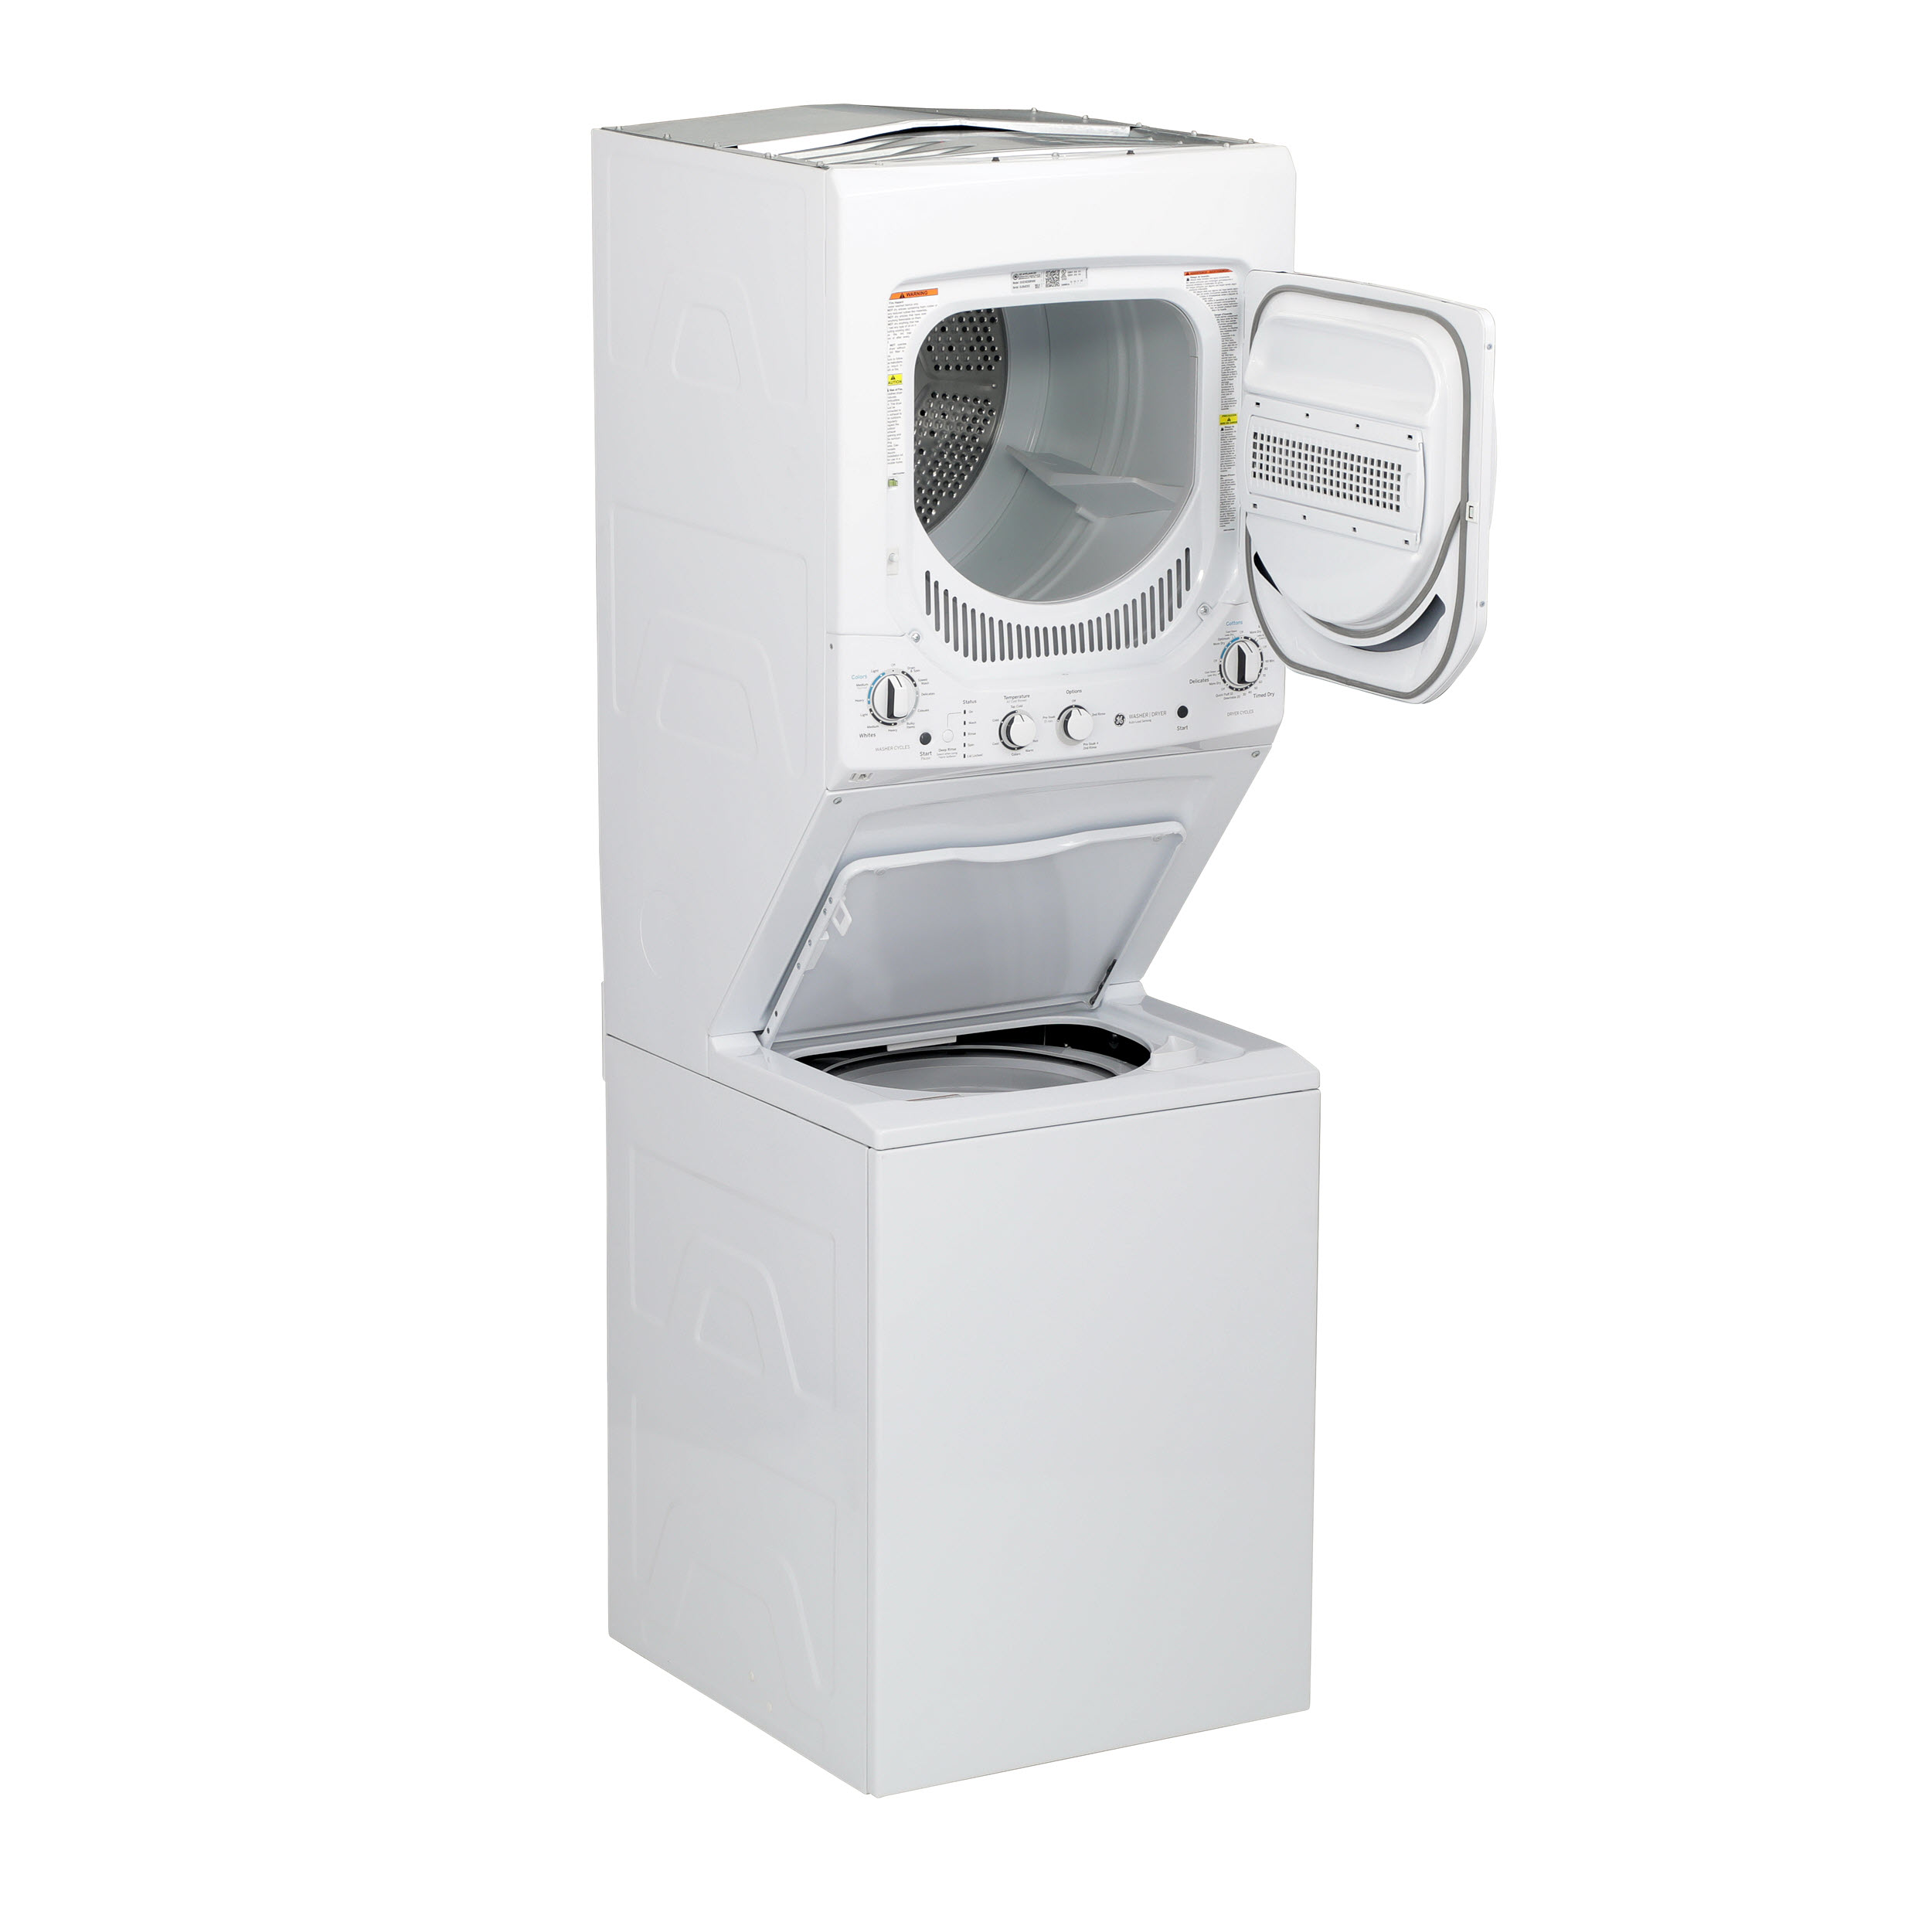 Model: GUD24ESSMWW | GE GE Unitized Spacemaker® 2.3 cu. ft. Capacity Washer with Stainless Steel Basket and 4.4 cu. ft. Capacity Electric Dryer